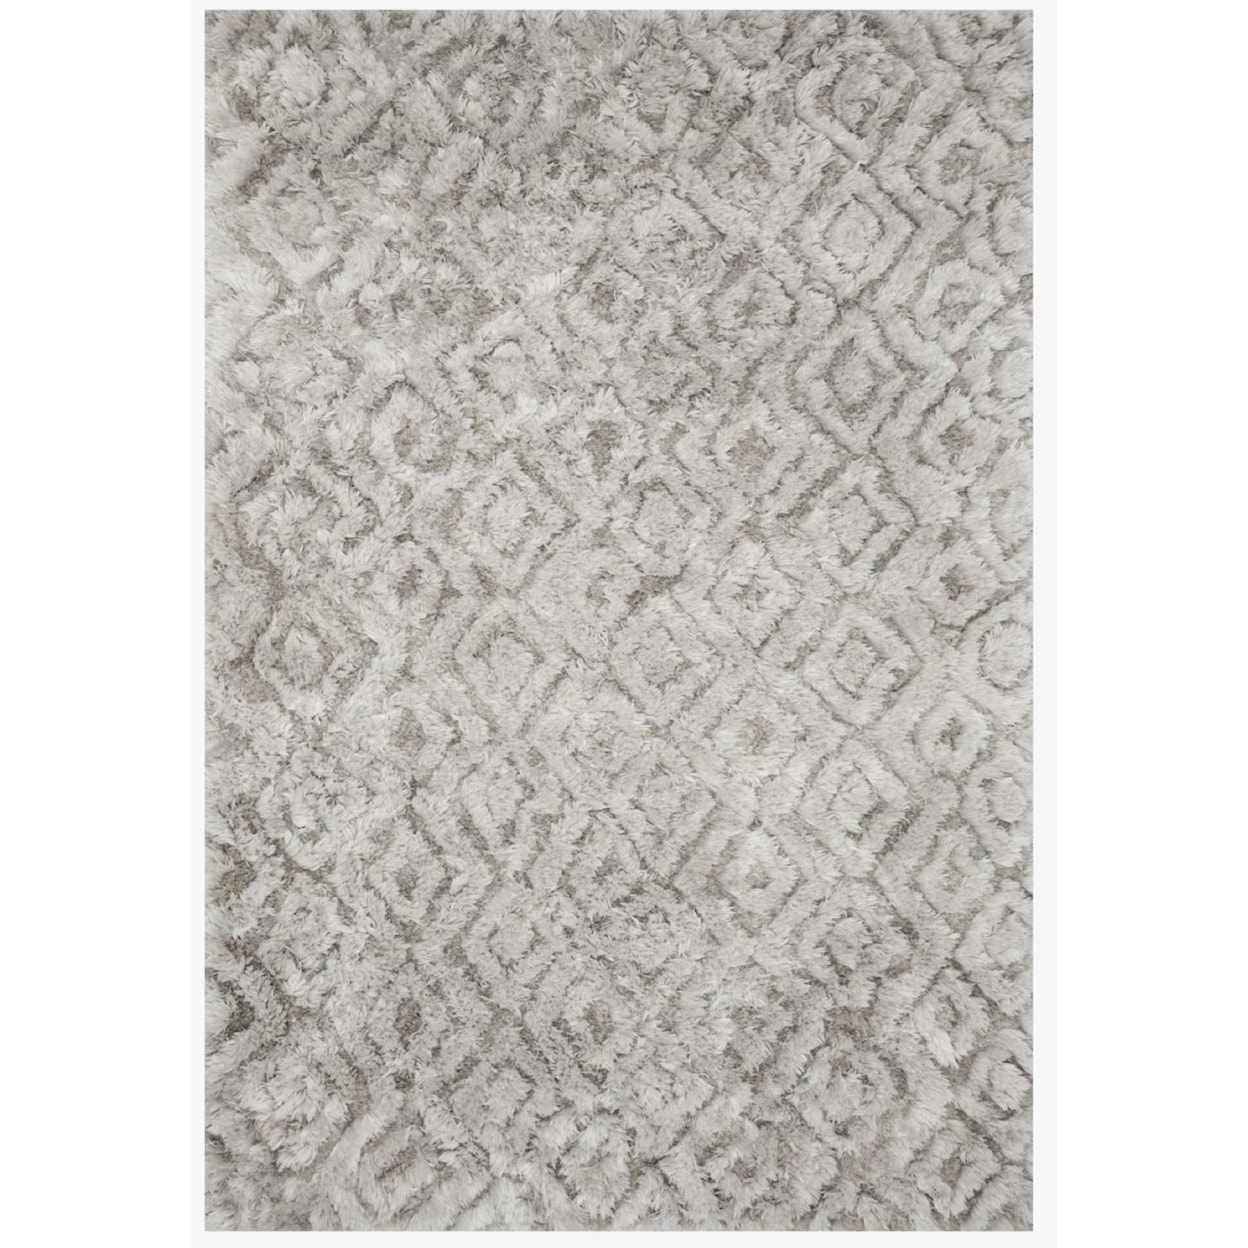 Reeds Rugs CASPIA 3-6 X 5-6 Silver Area Rug